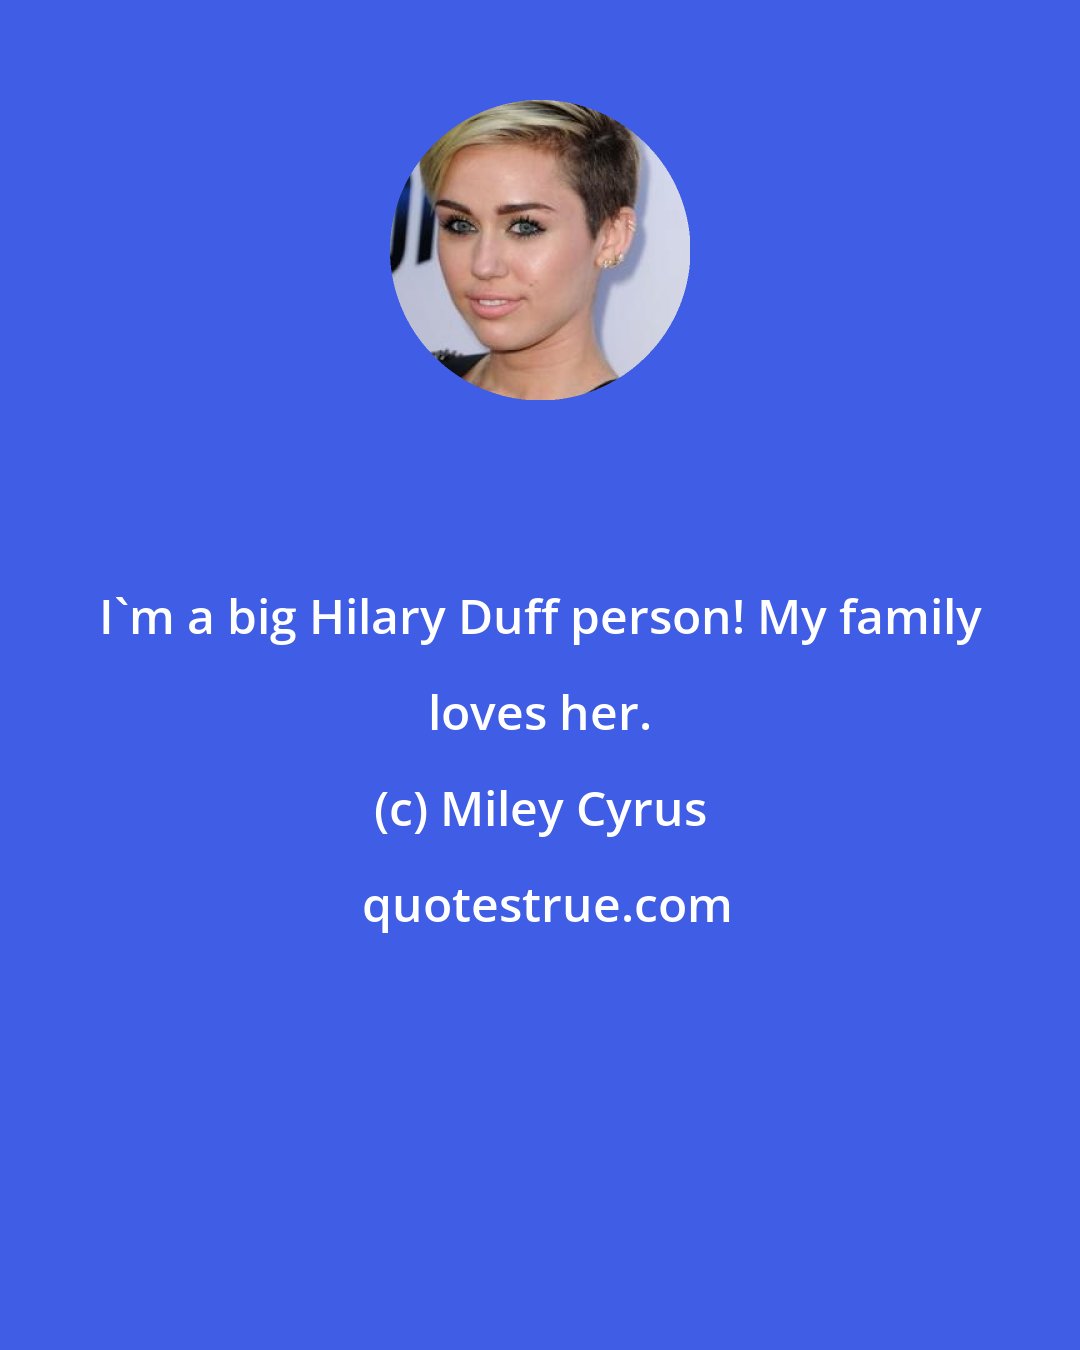 Miley Cyrus: I'm a big Hilary Duff person! My family loves her.